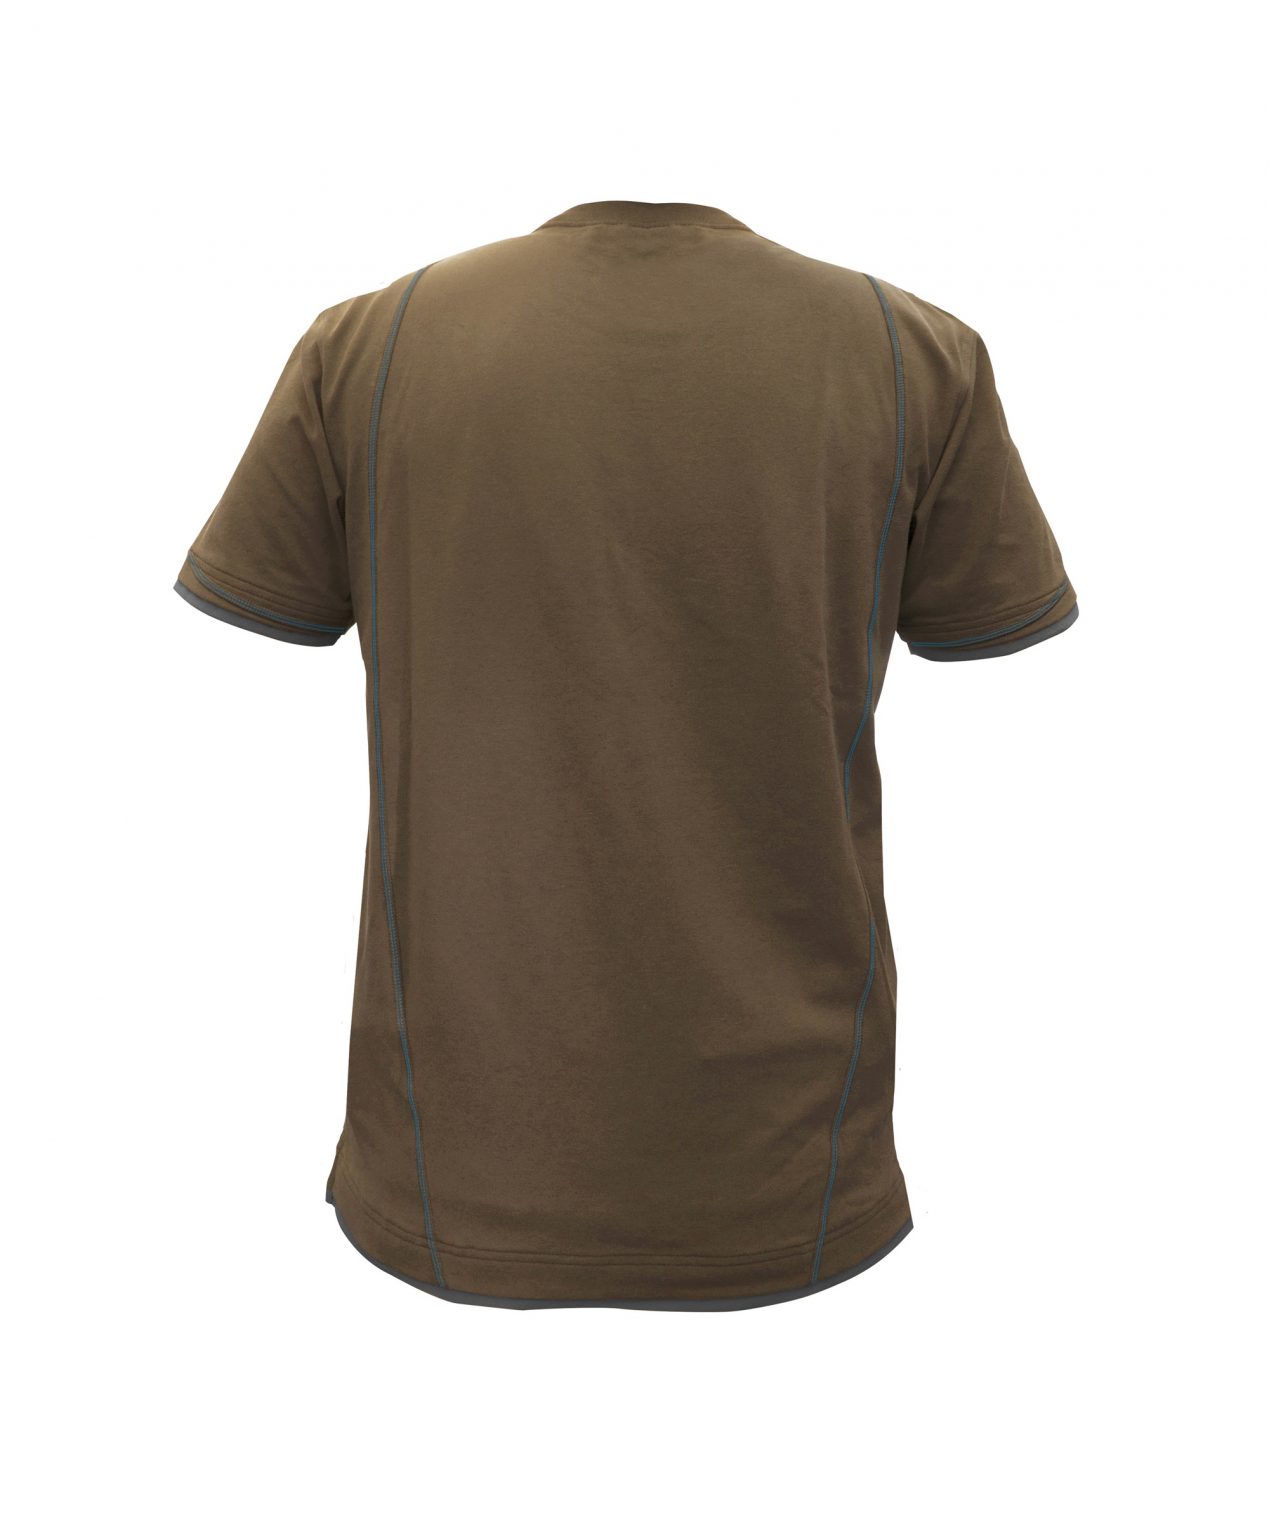 kinetic t shirt clay brown anthracite grey back